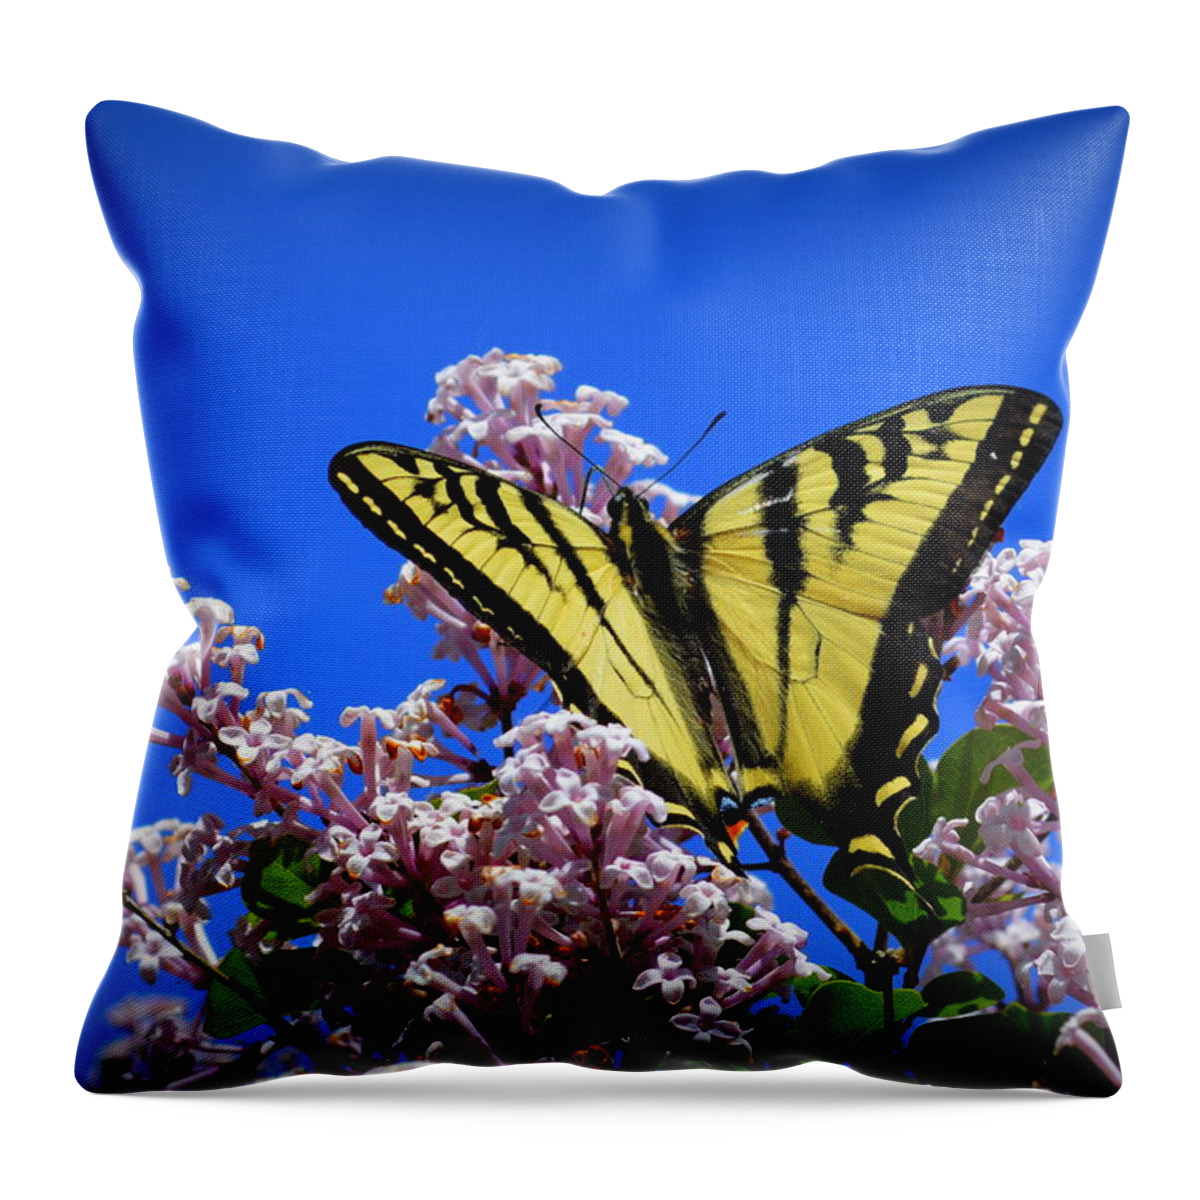 Butterfly Throw Pillow featuring the photograph Springtime Beauty by Lori Seaman